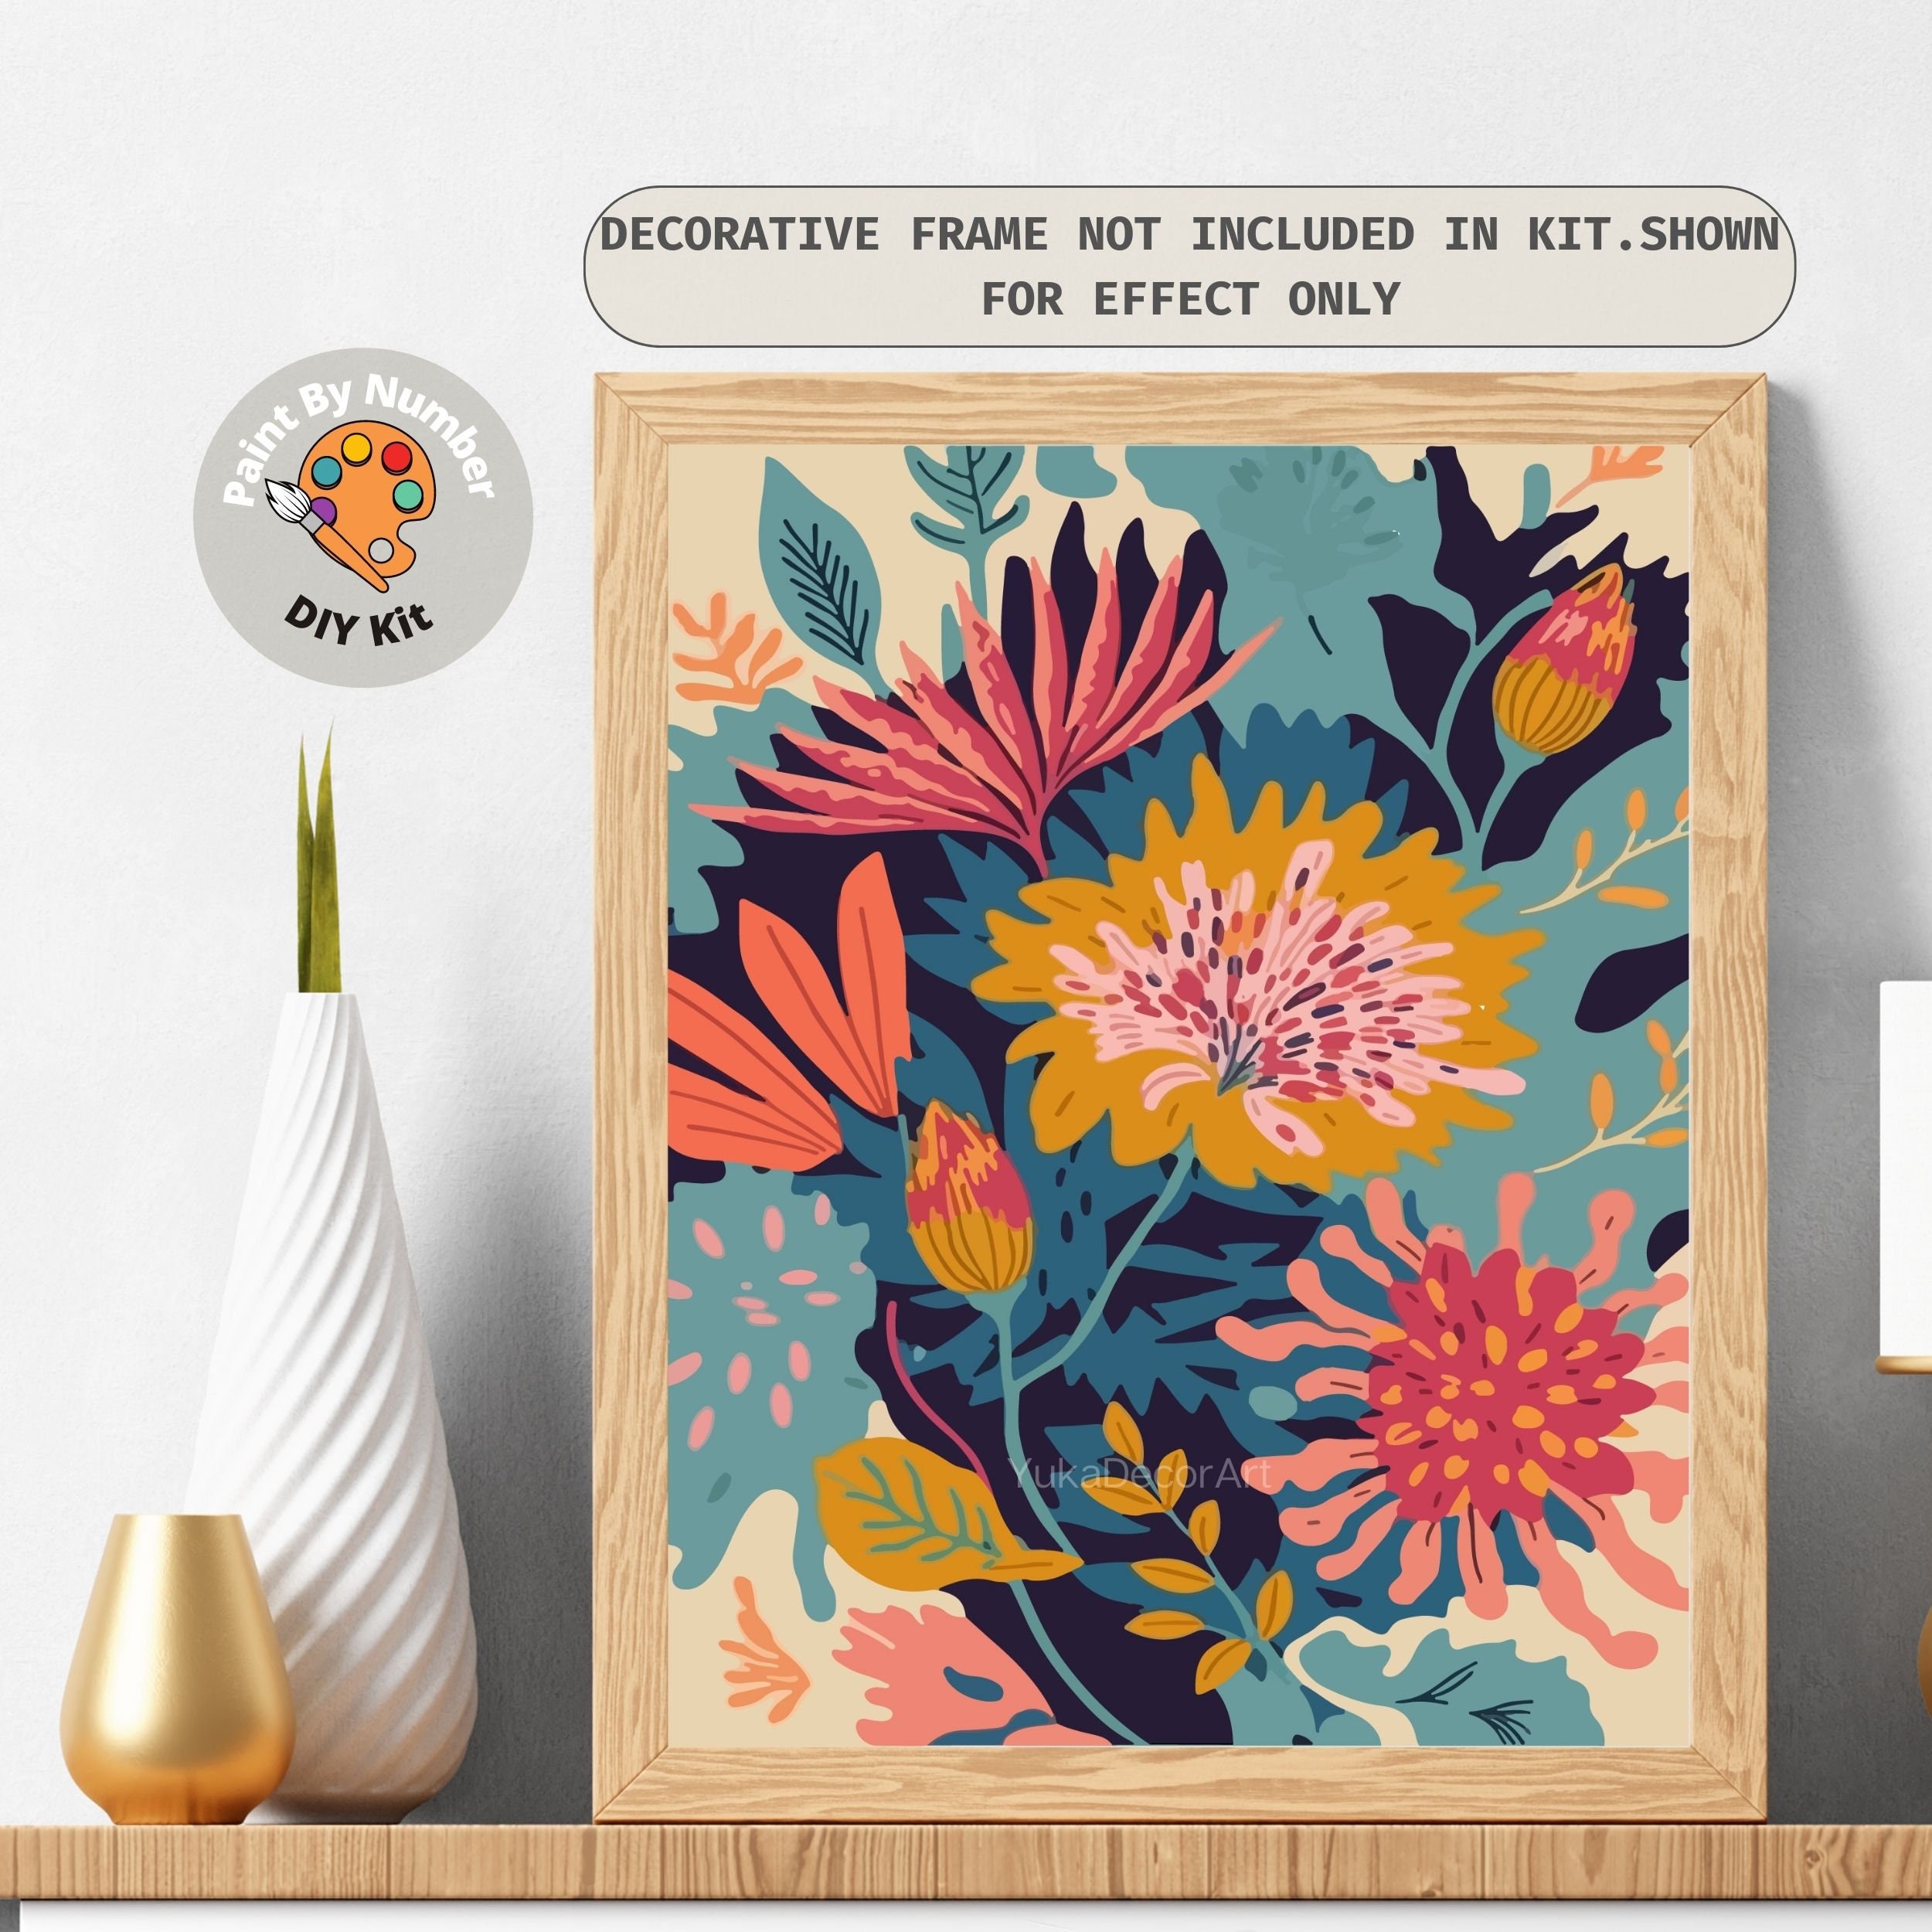 Paint by Numbers Frame - Frame Art Kit